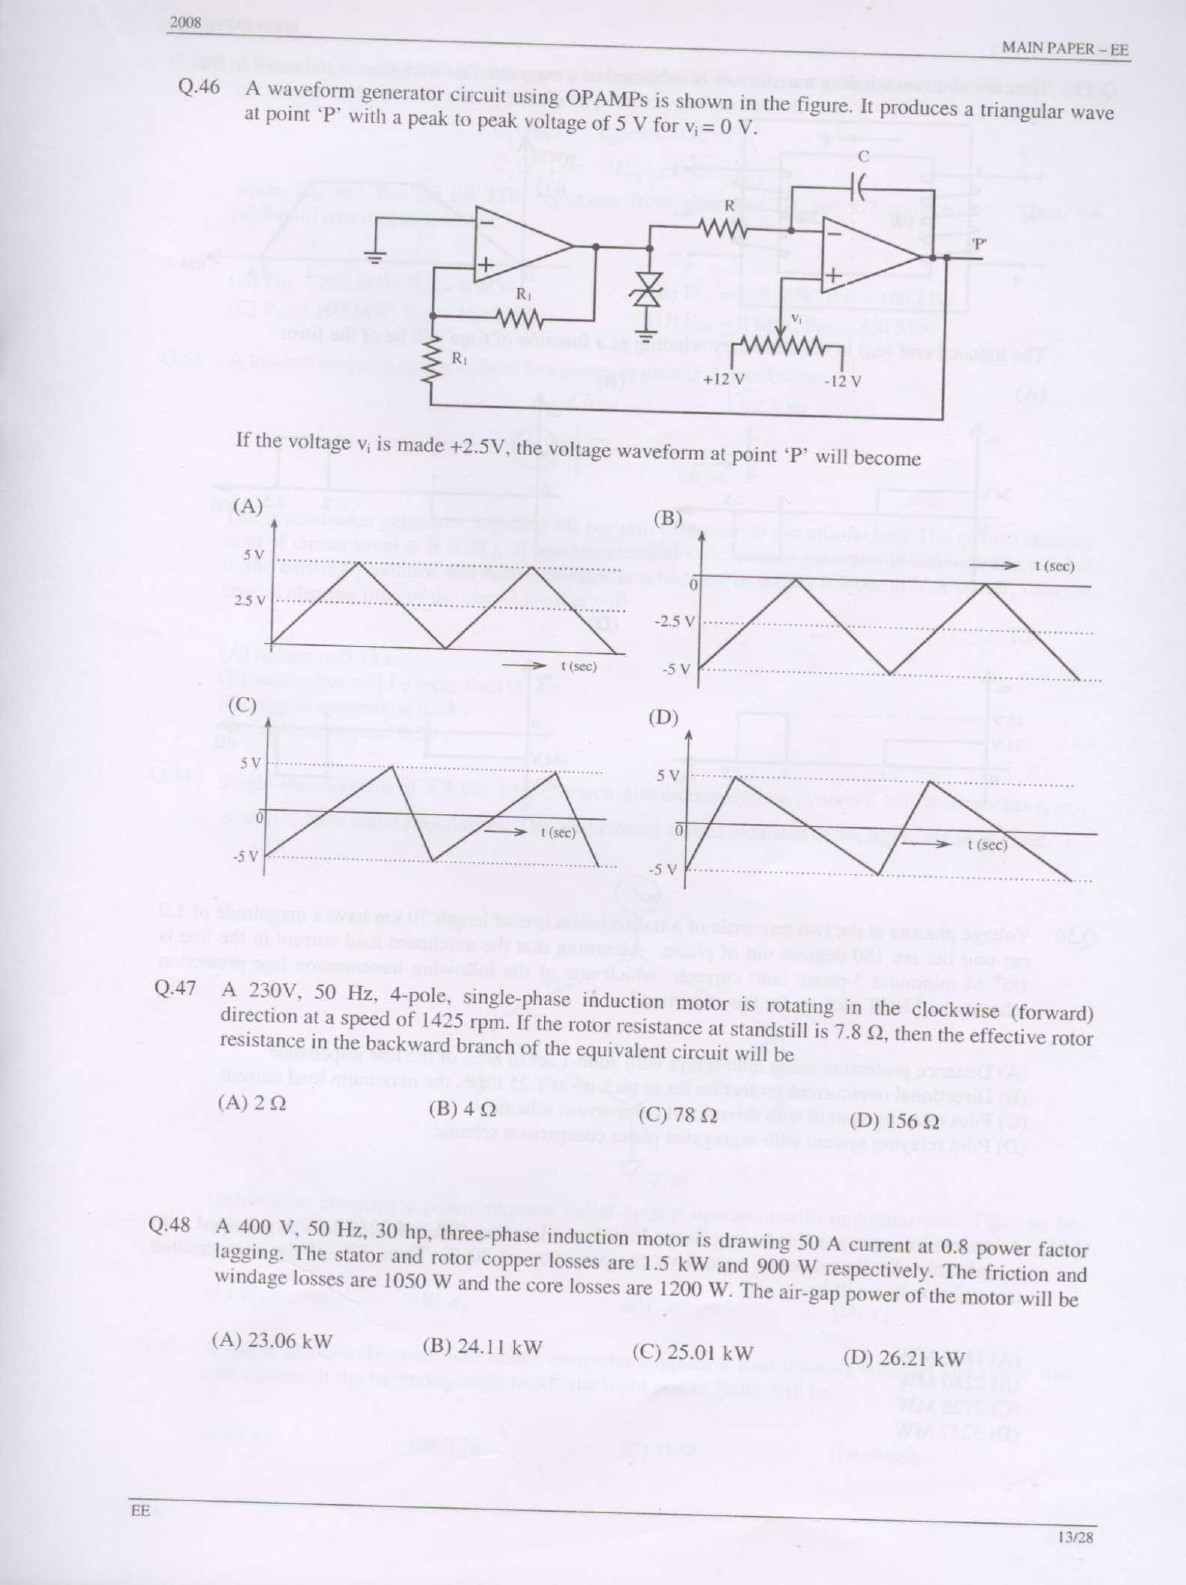 GATE Exam Question Paper 2008 Electrical Engineering 13